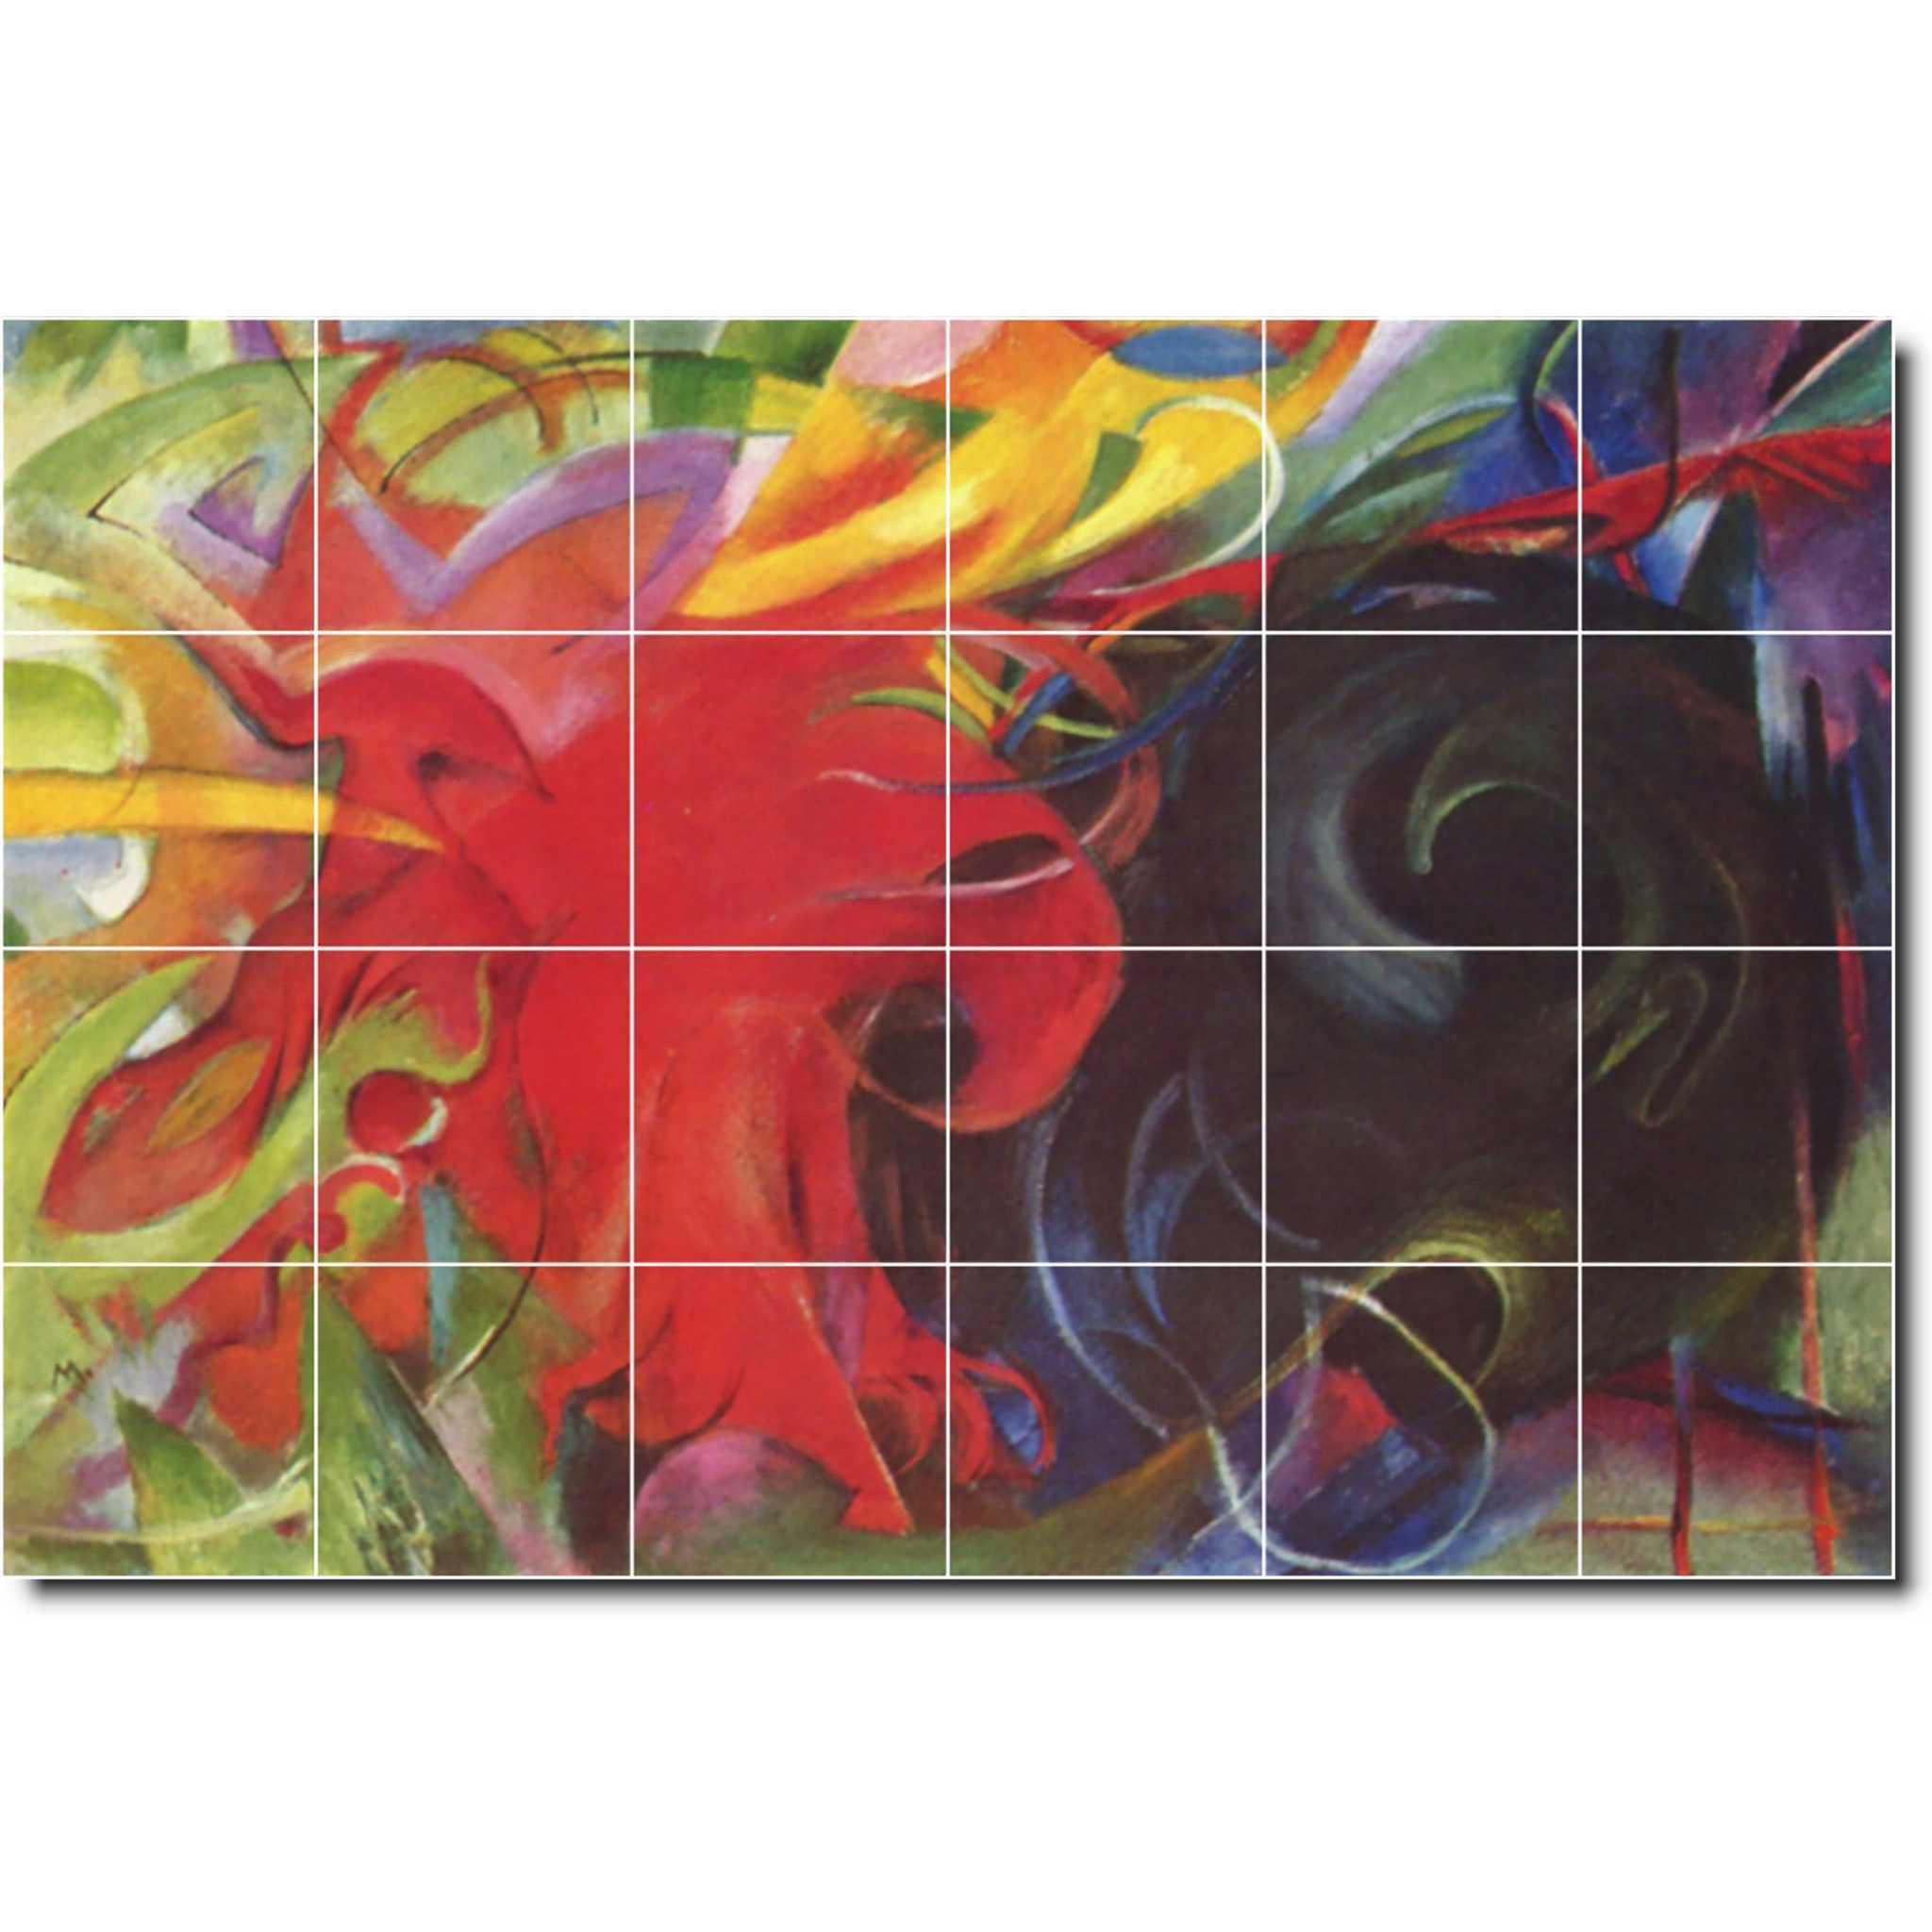 franz marc abstract painting ceramic tile mural p05711